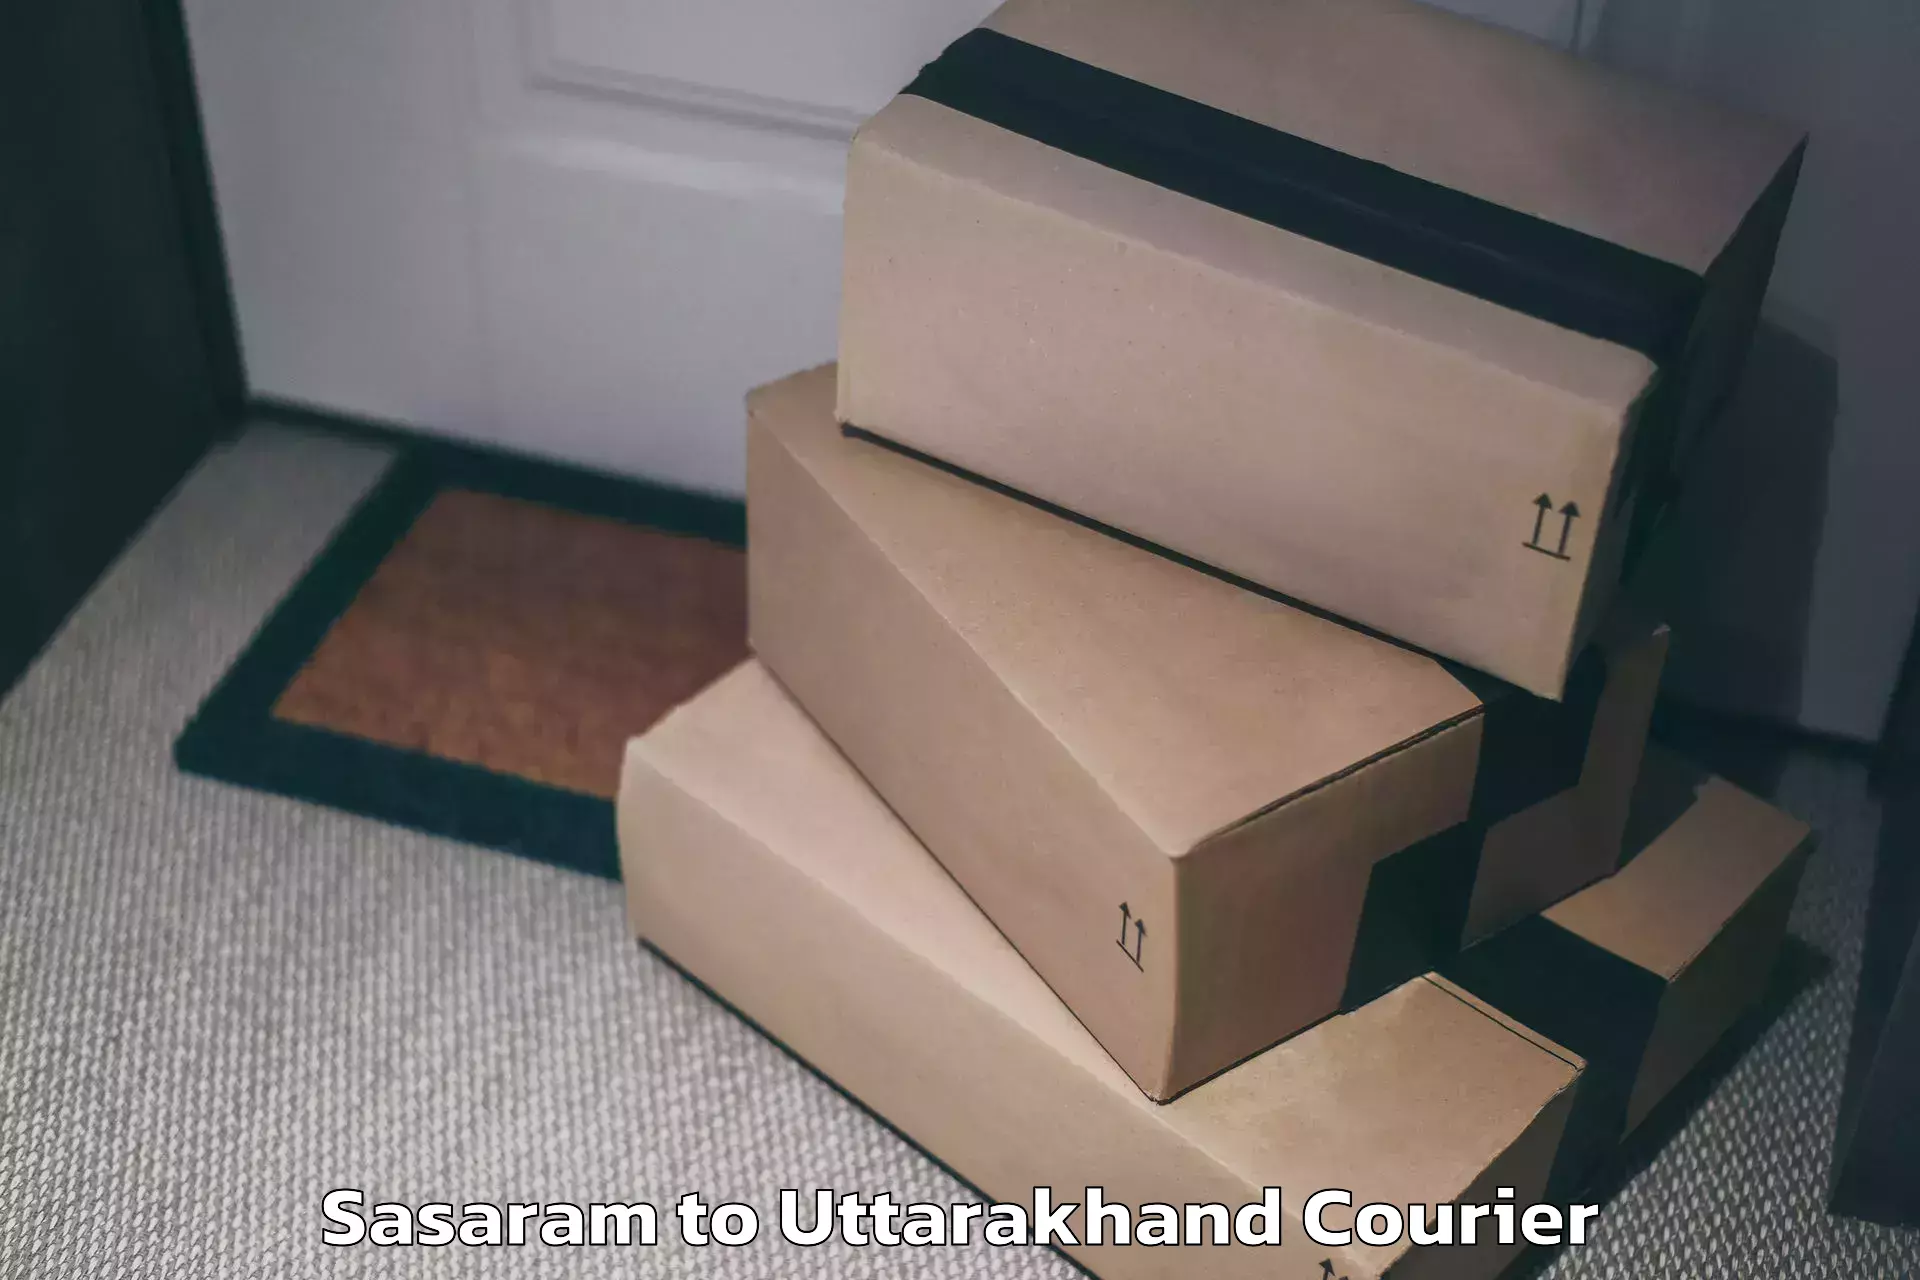 Personal effects shipping in Sasaram to IIT Roorkee